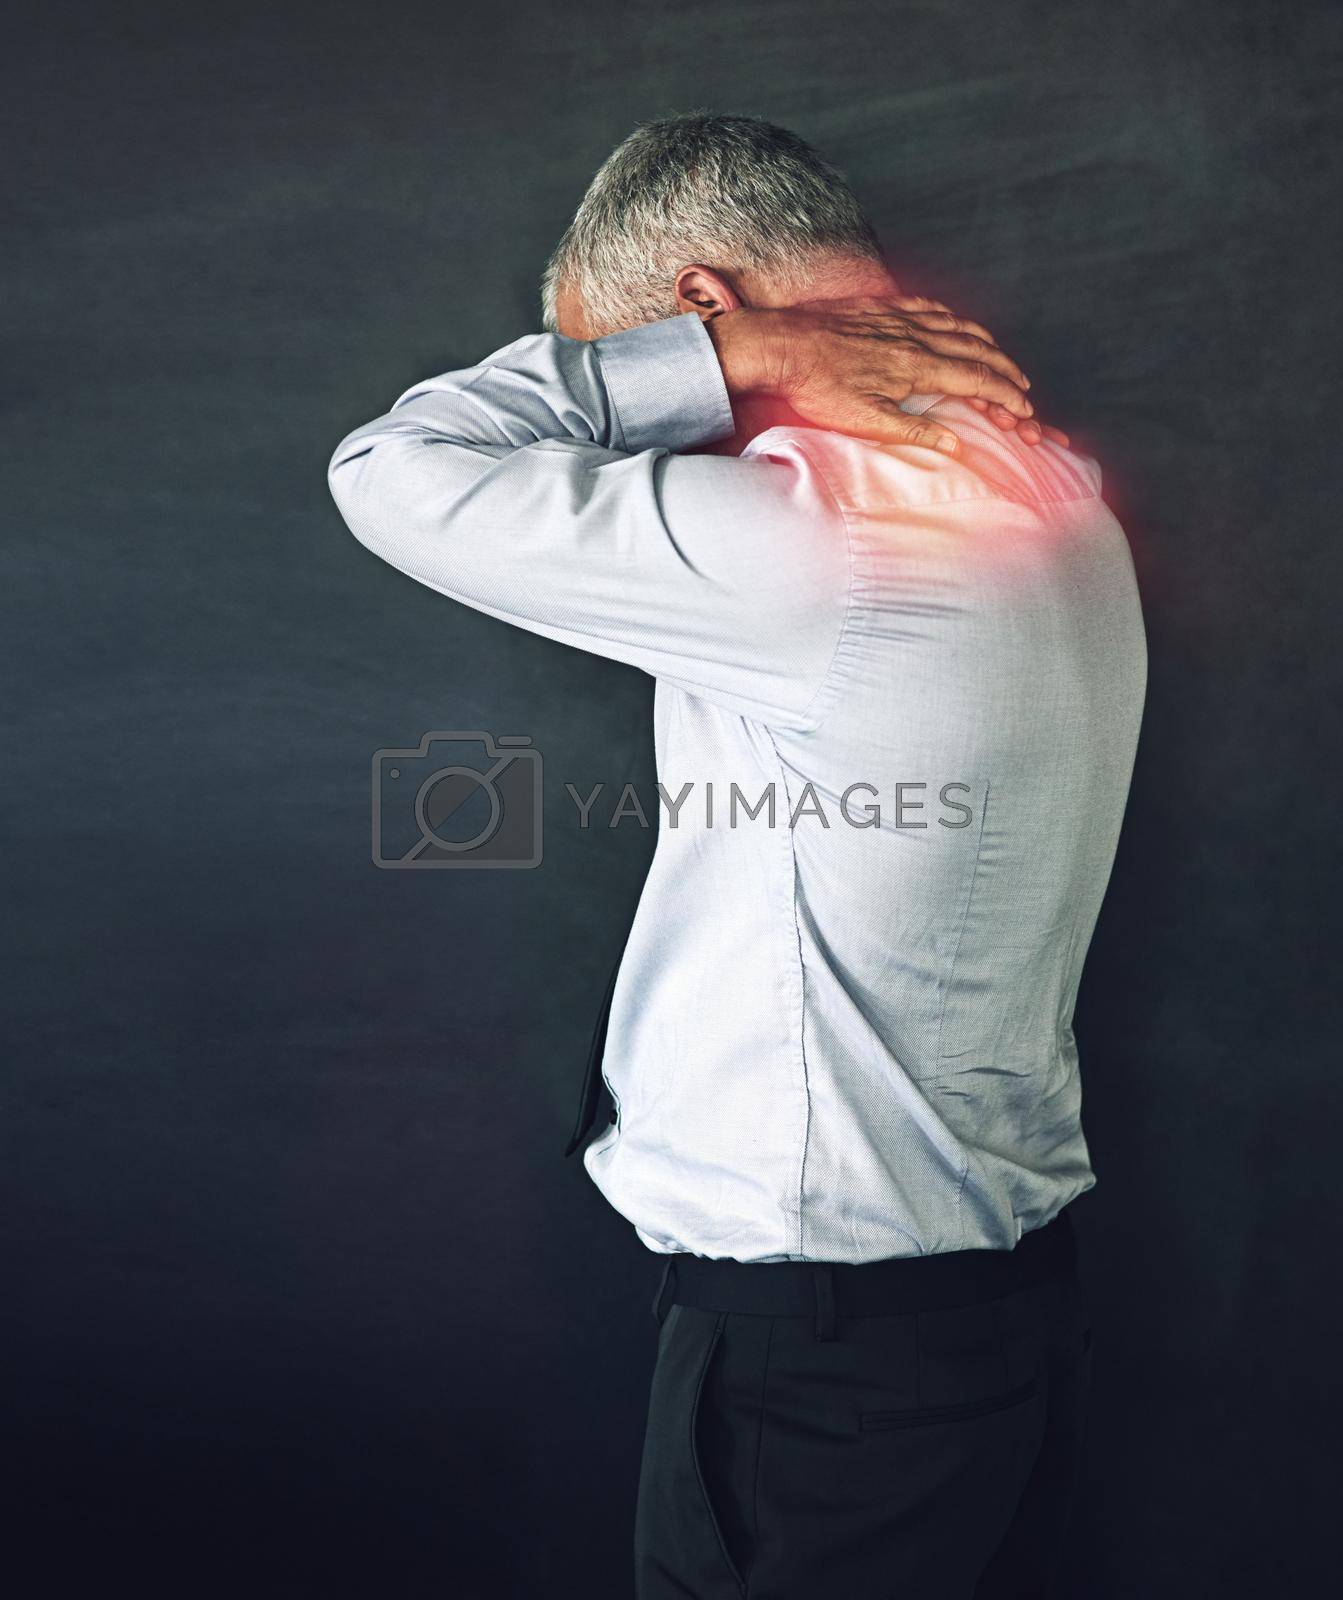 Royalty free image of When work stress becomes physical. Studio shot of a mature man experiencing neck ache against a black background. by YuriArcurs